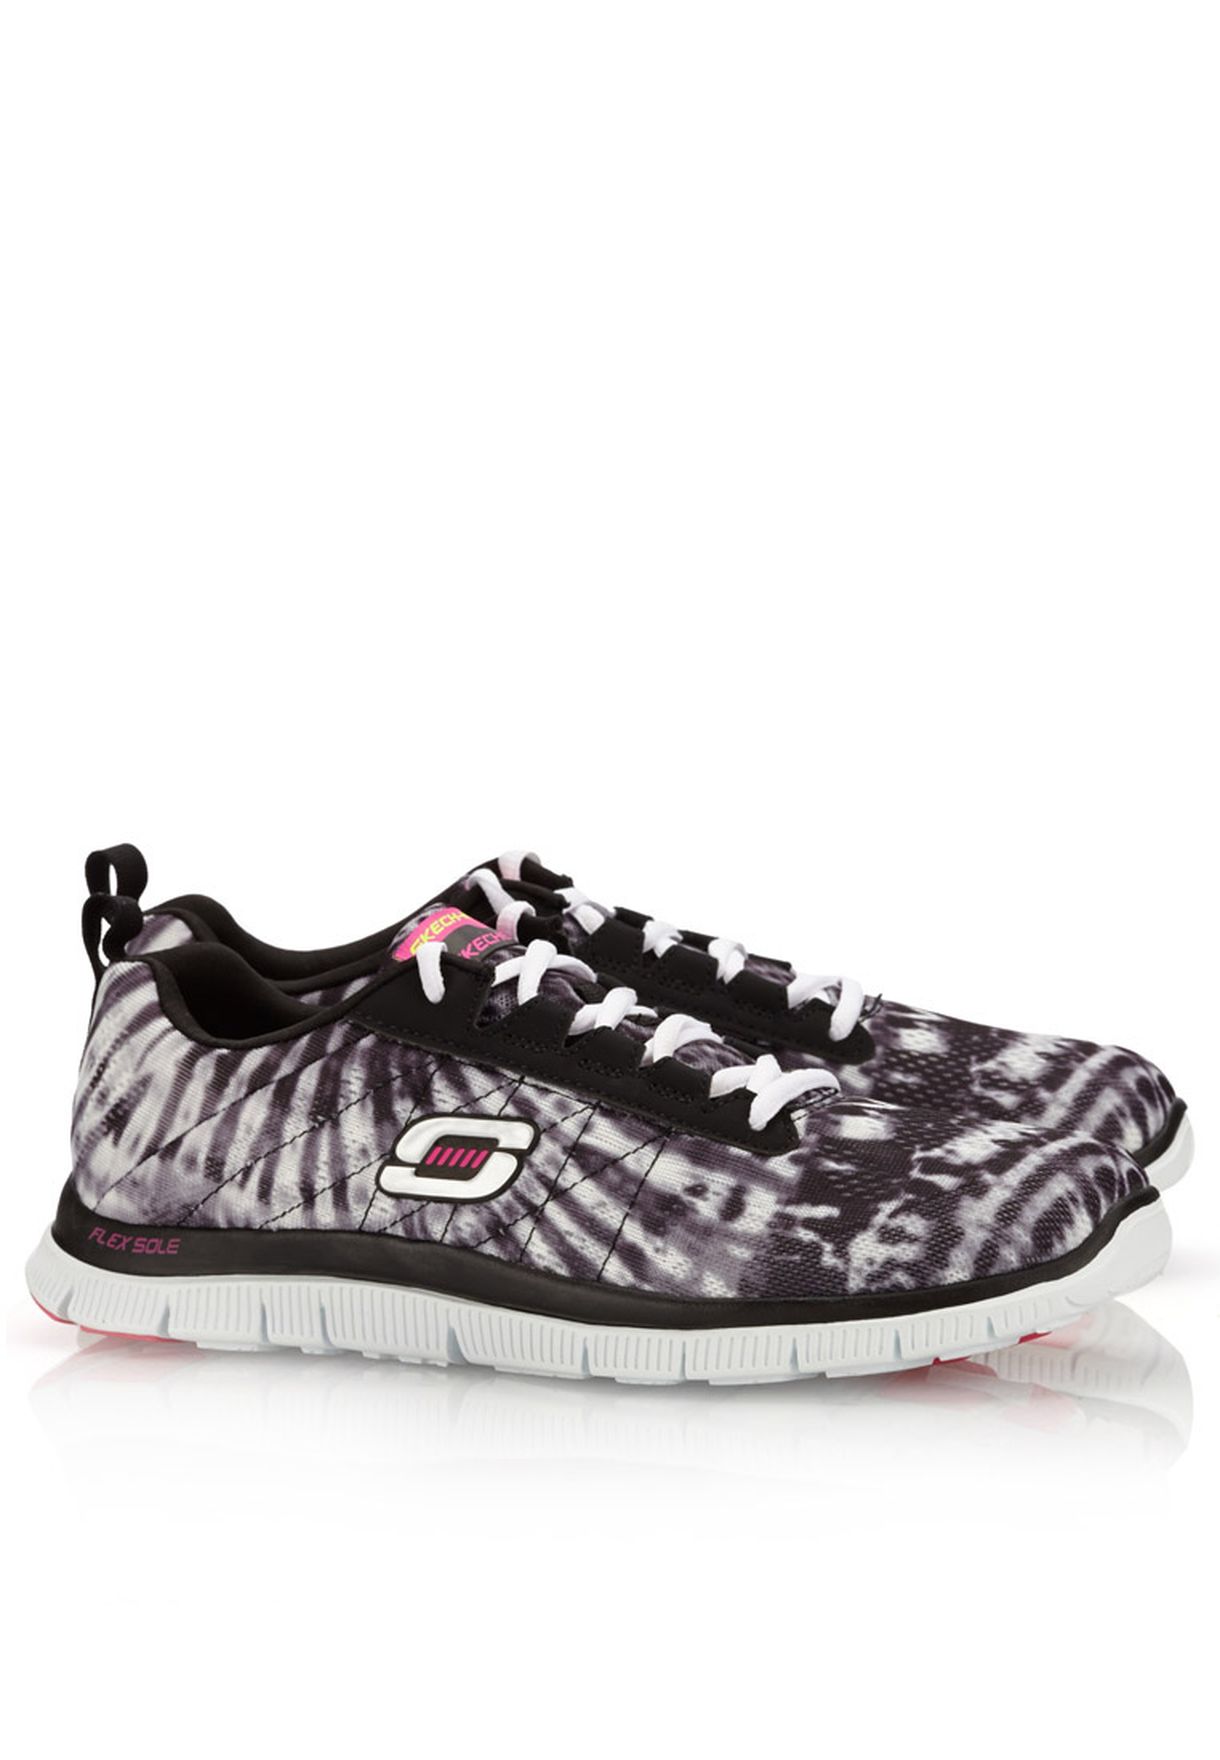 skechers flex appeal limited edition